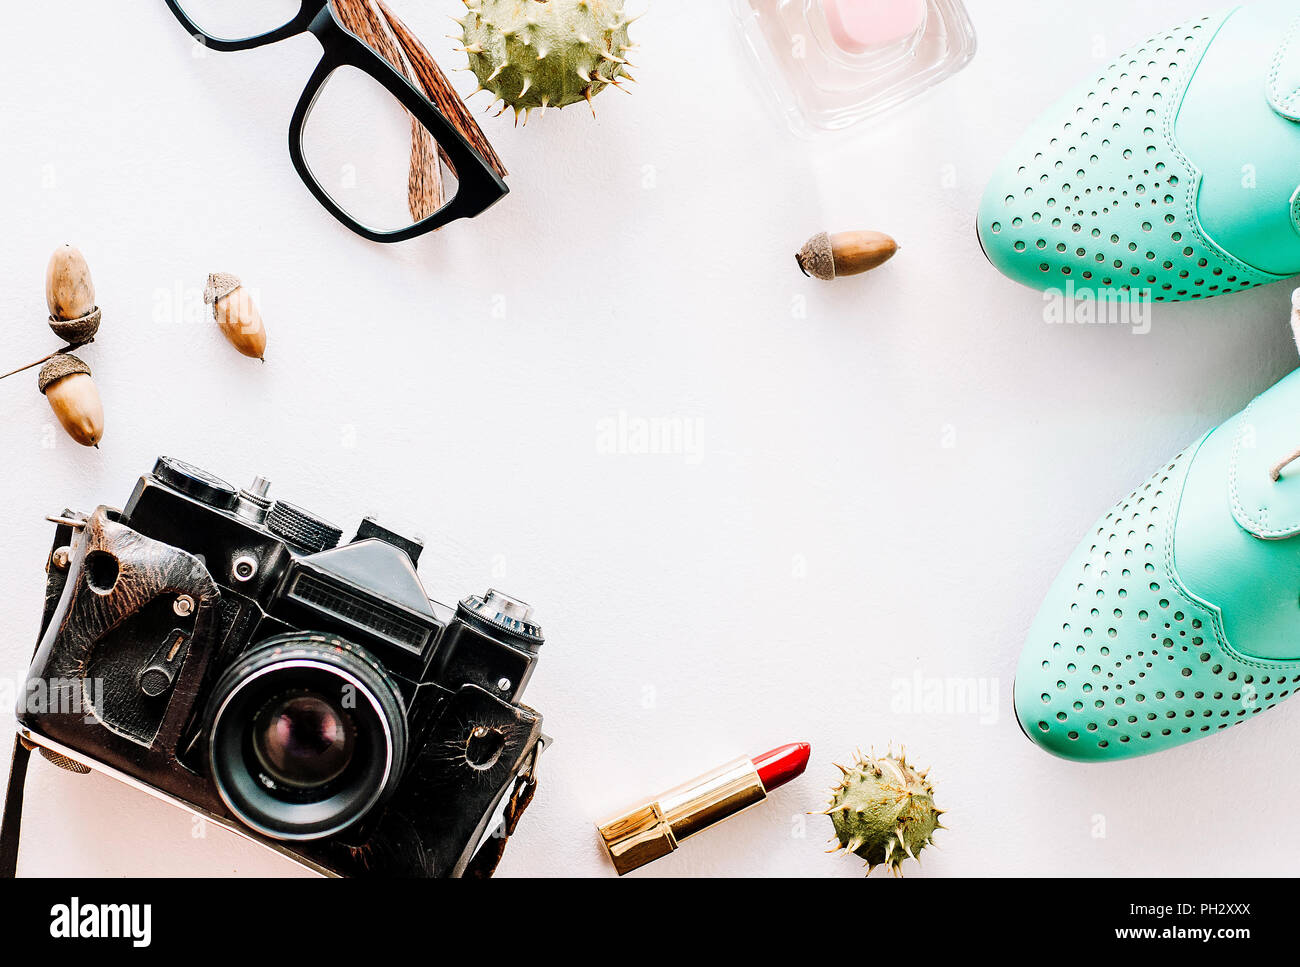 fashion leather shoes lie with the camera, glasses and acorns. Stock Photo